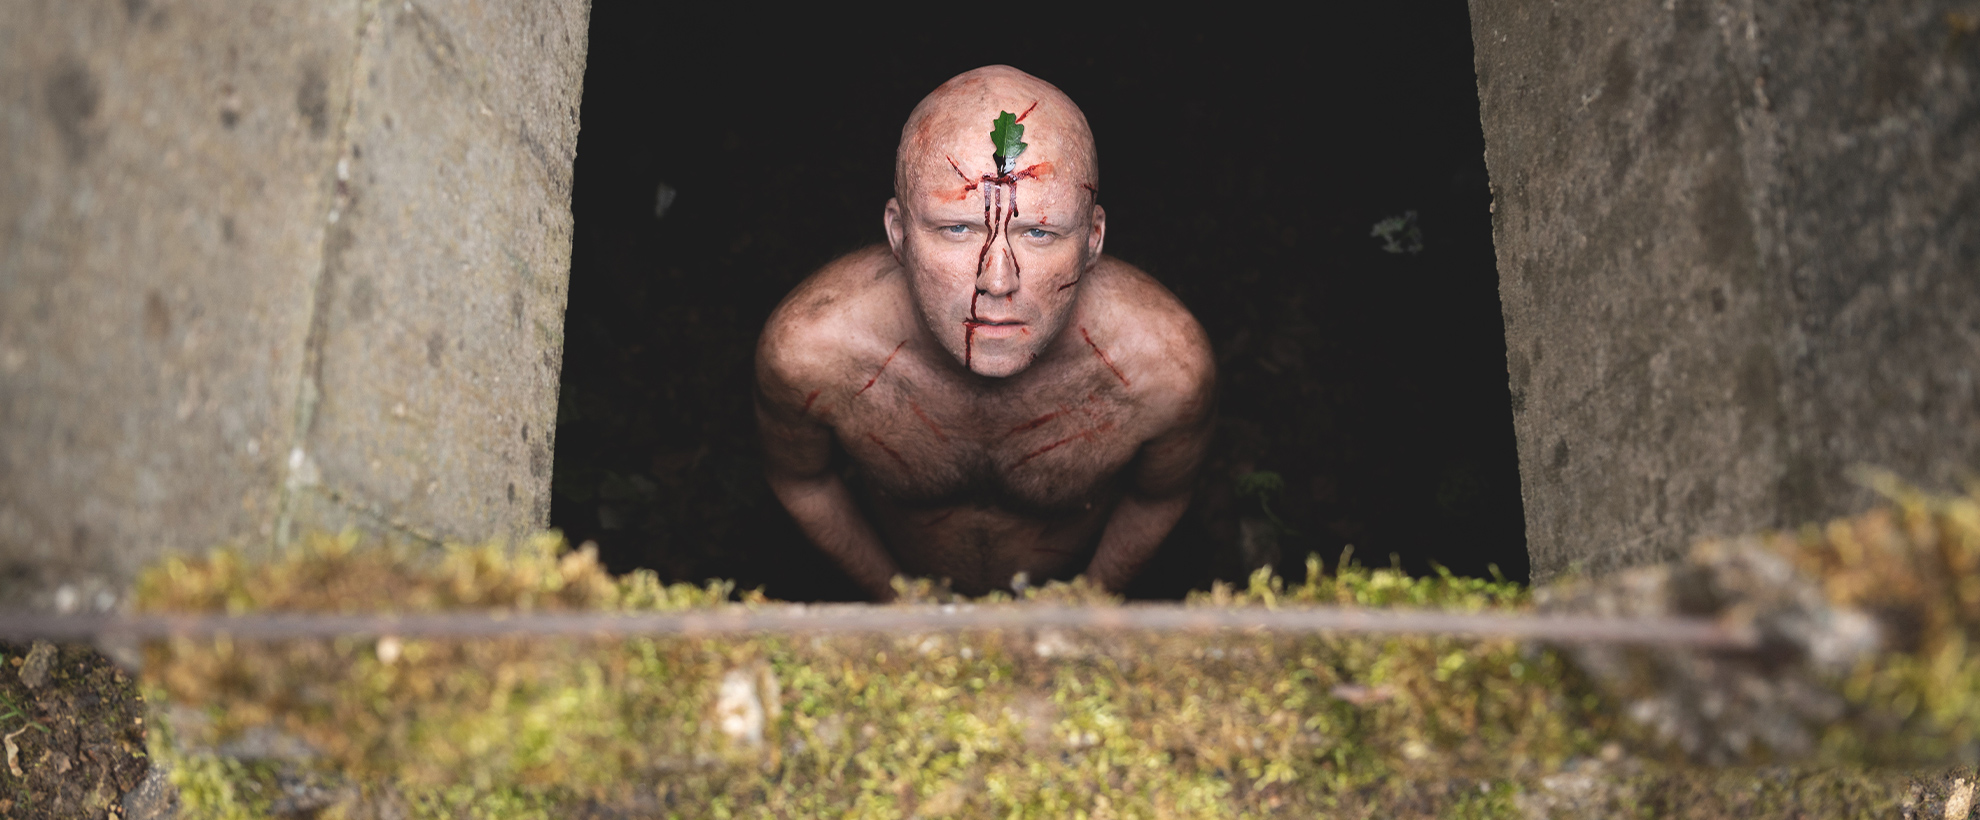 A nude man stands in an underground tunnel, with a leaf in his forehead